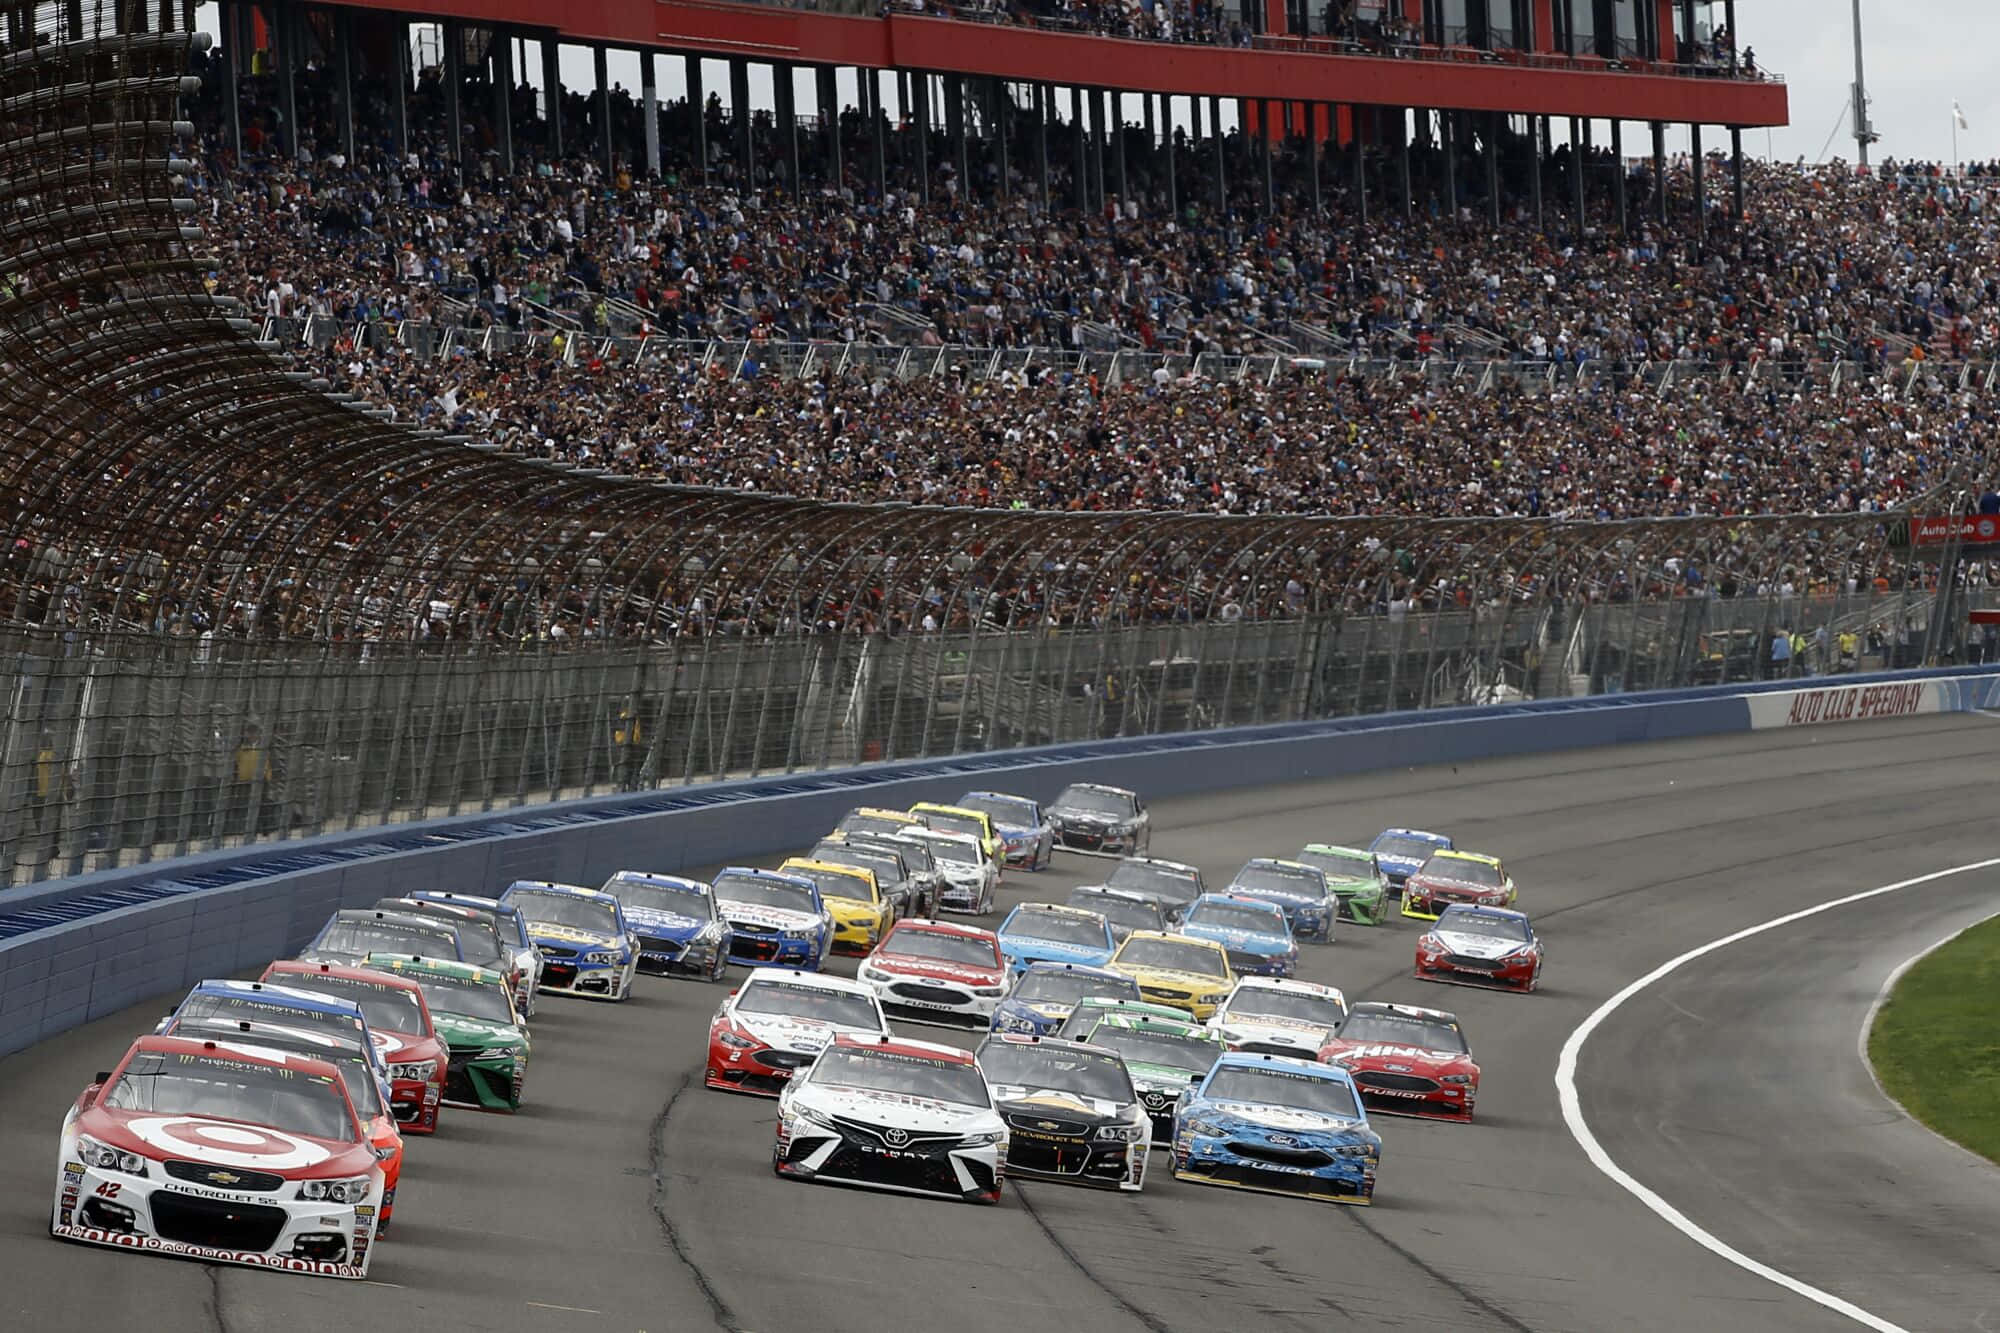 Nascar Drivers Race Down The Track During A Race